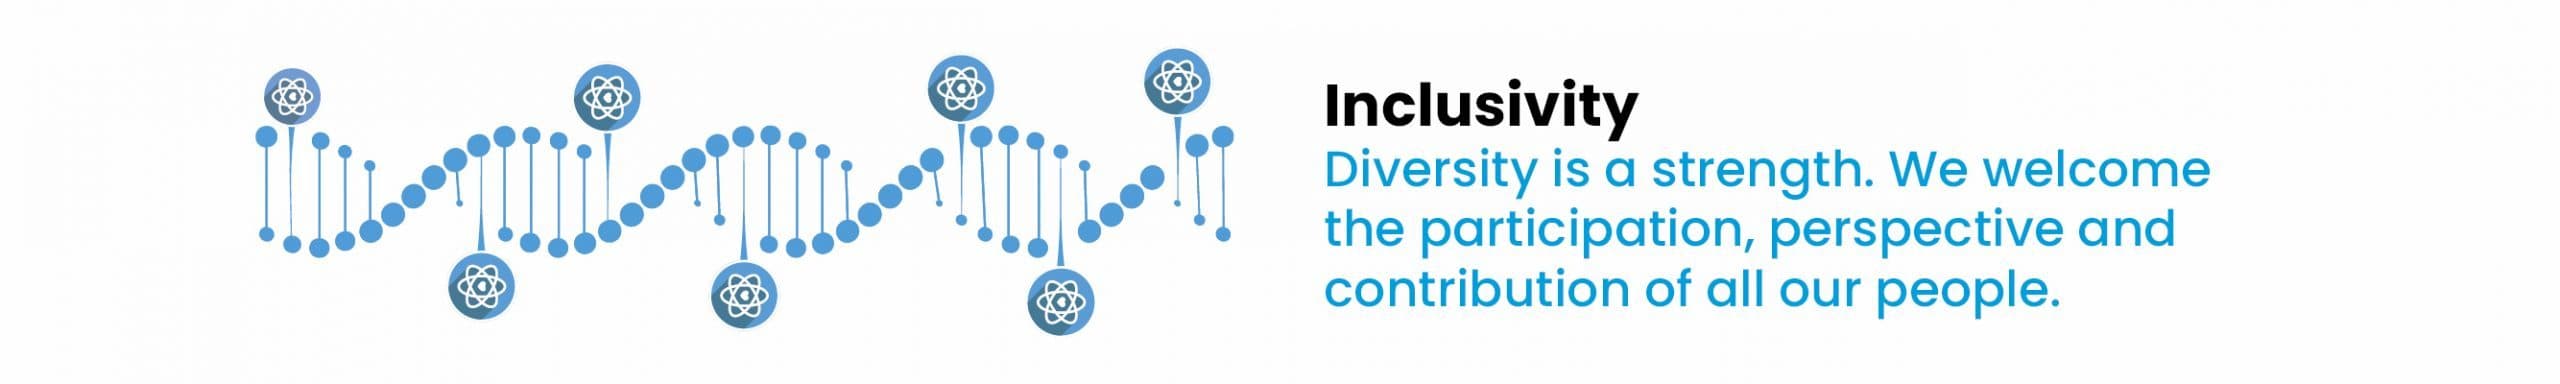 Inclusivity - diversity is a strength. we welcome the participation, perspective and contribution of all our people